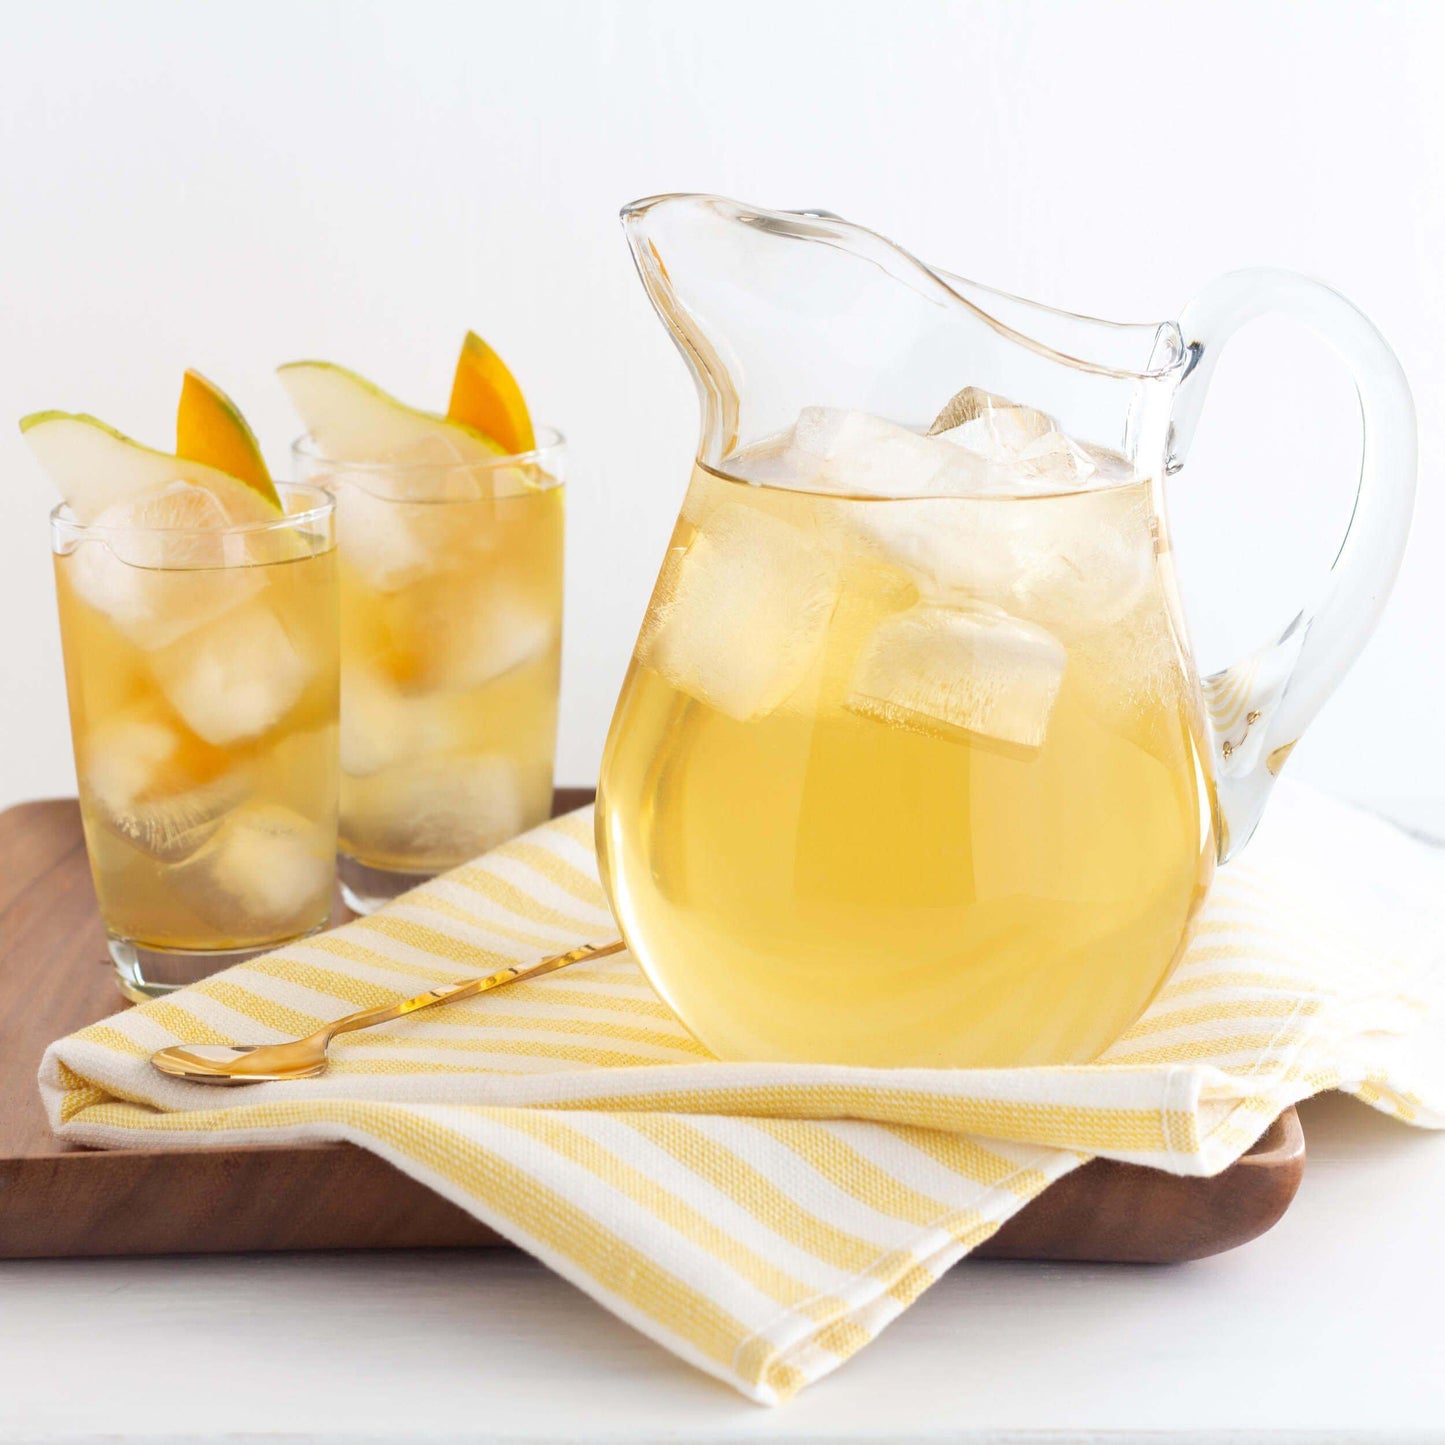 Mango Pear Organic White Tea shown as iced tea in a glass pitcher, with two glasses of iced tea garnished with mango wedges, displayed on yellow and white striped towel